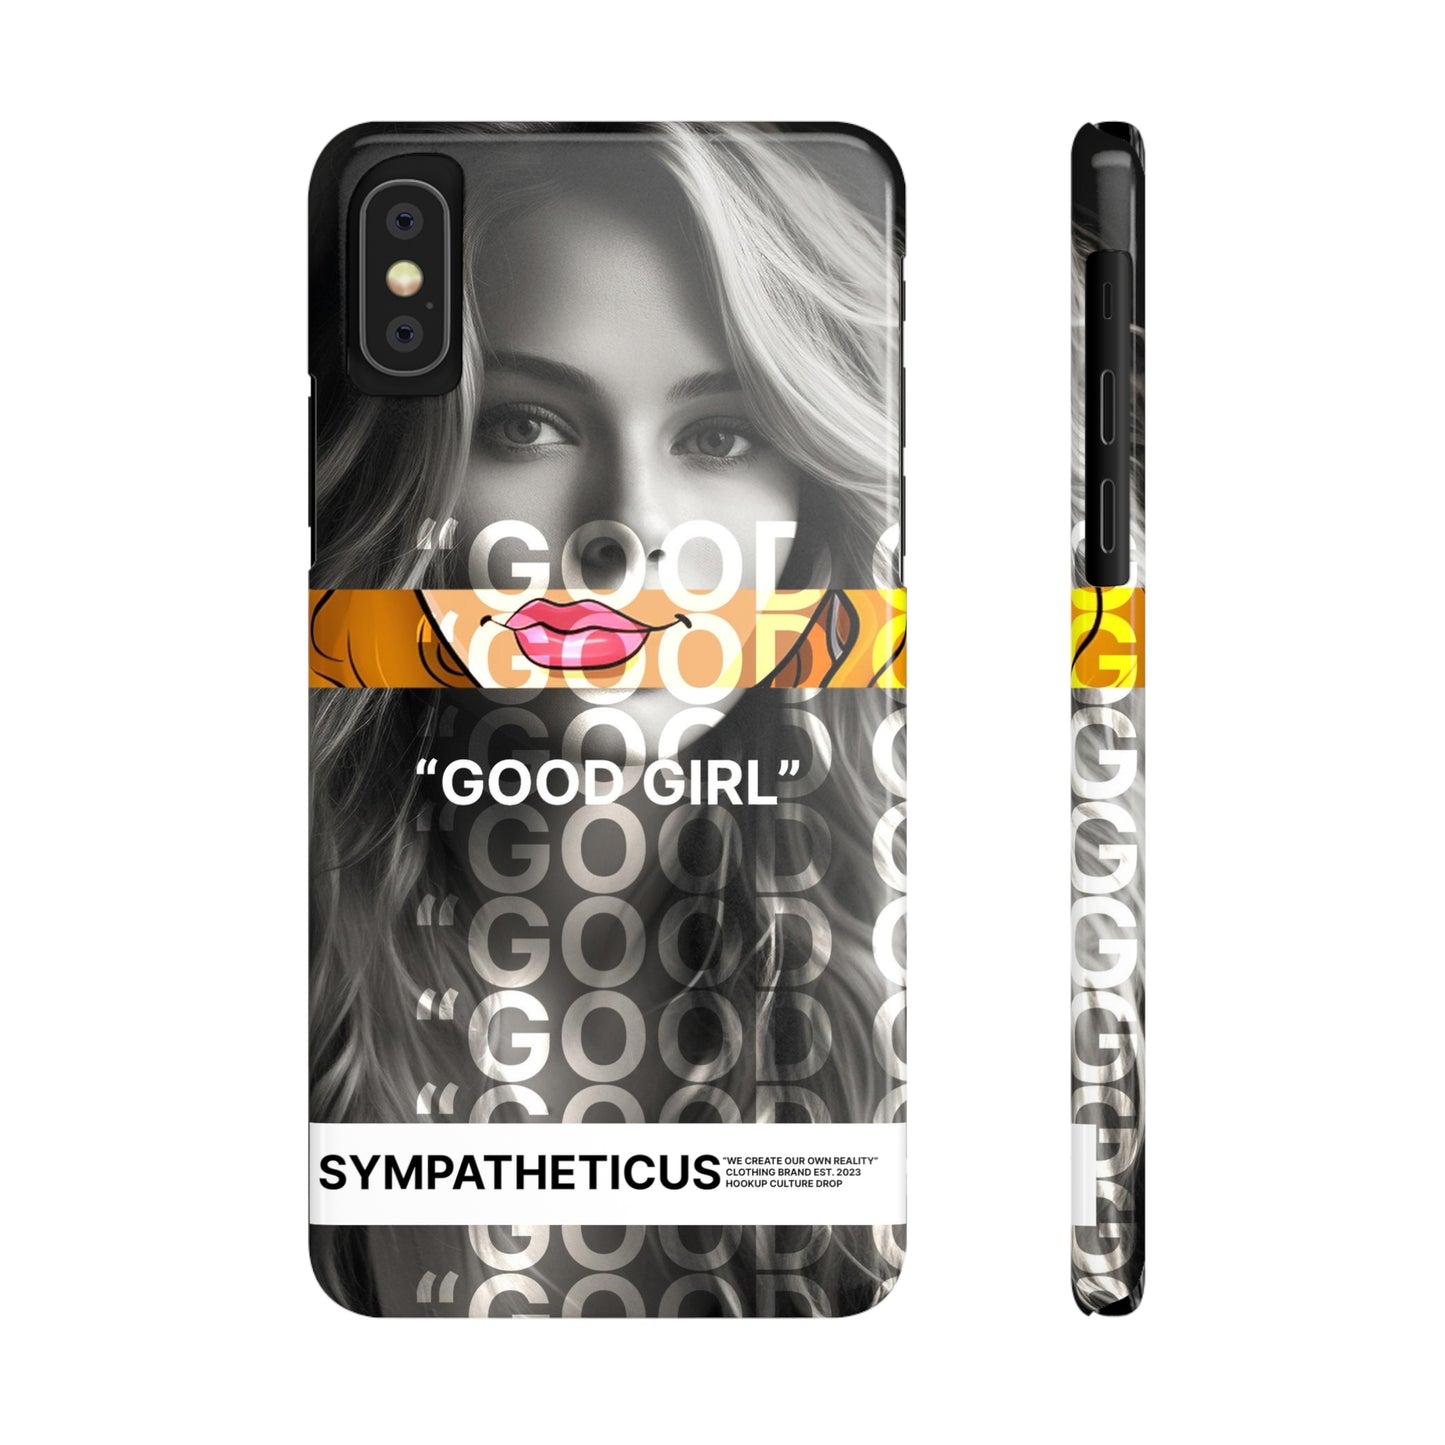 Hookup culture special iphone case-12